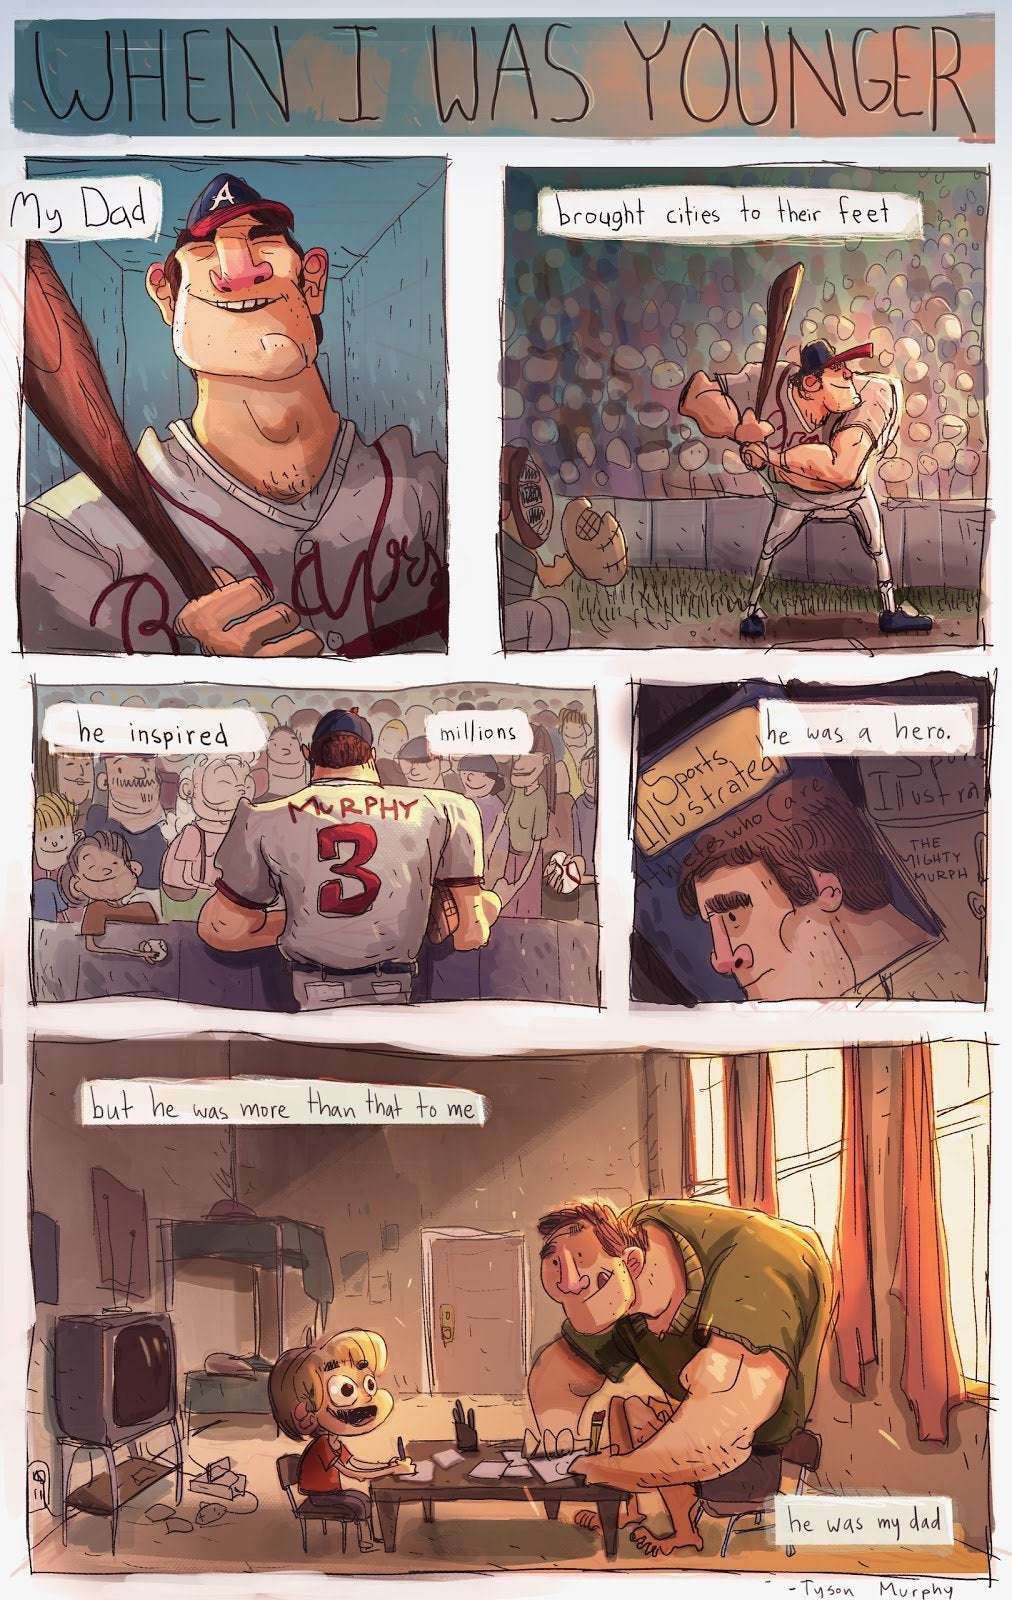 image showing Dale Murphy is my dad and was one of the greats. Today is his last chance to make it into the Hall of Fame. I made this comic to show how I feel about it.